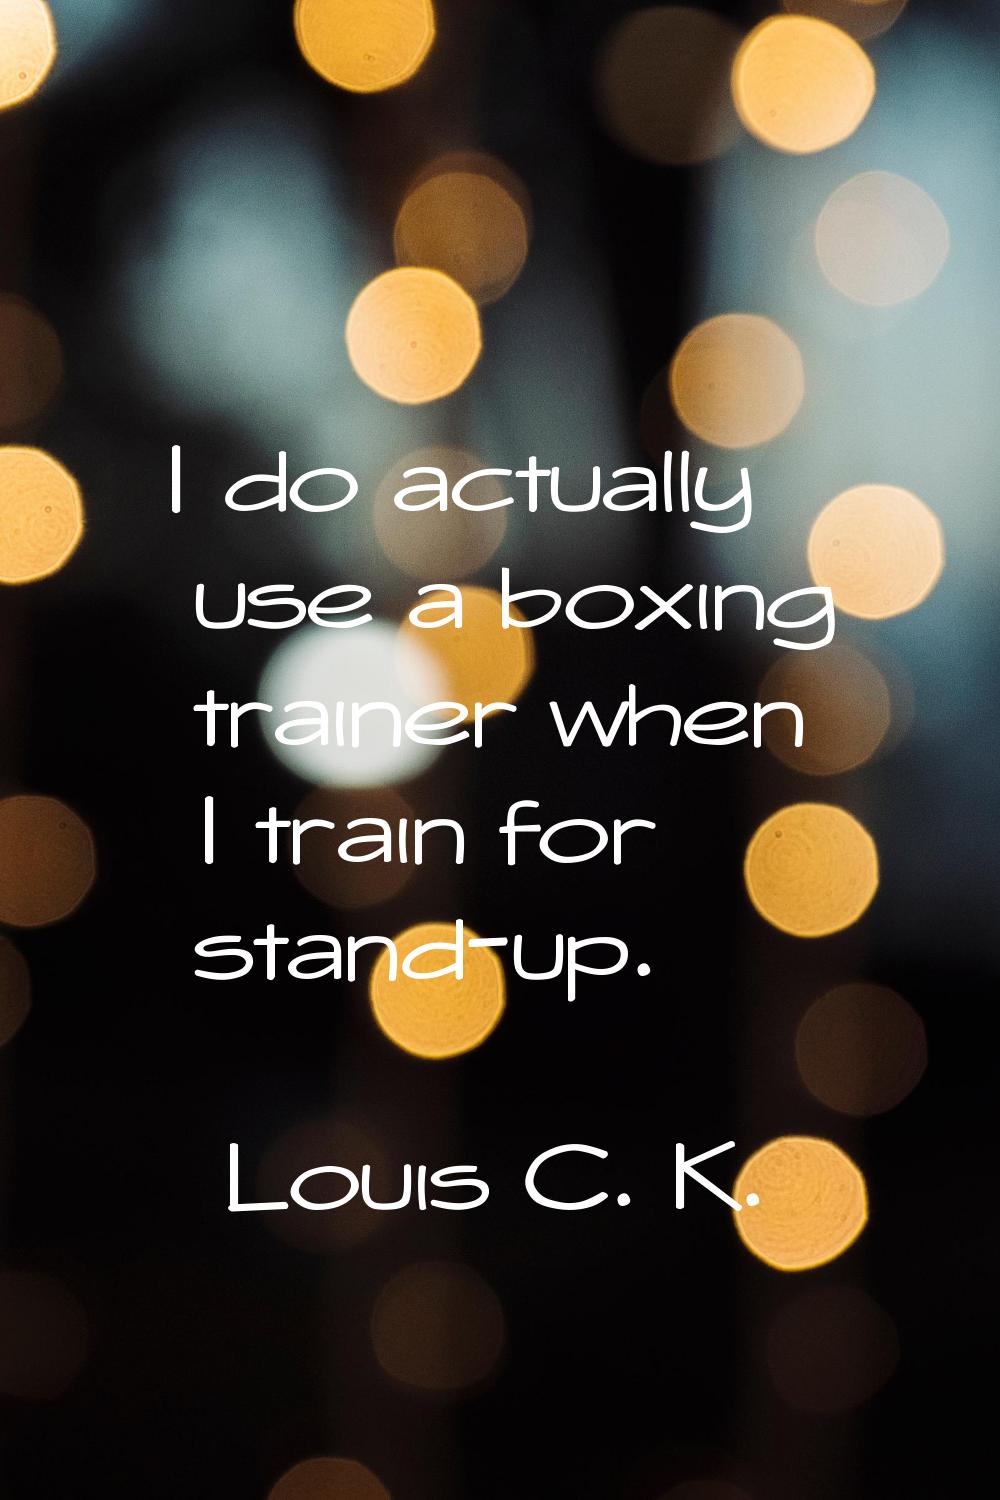 I do actually use a boxing trainer when I train for stand-up.